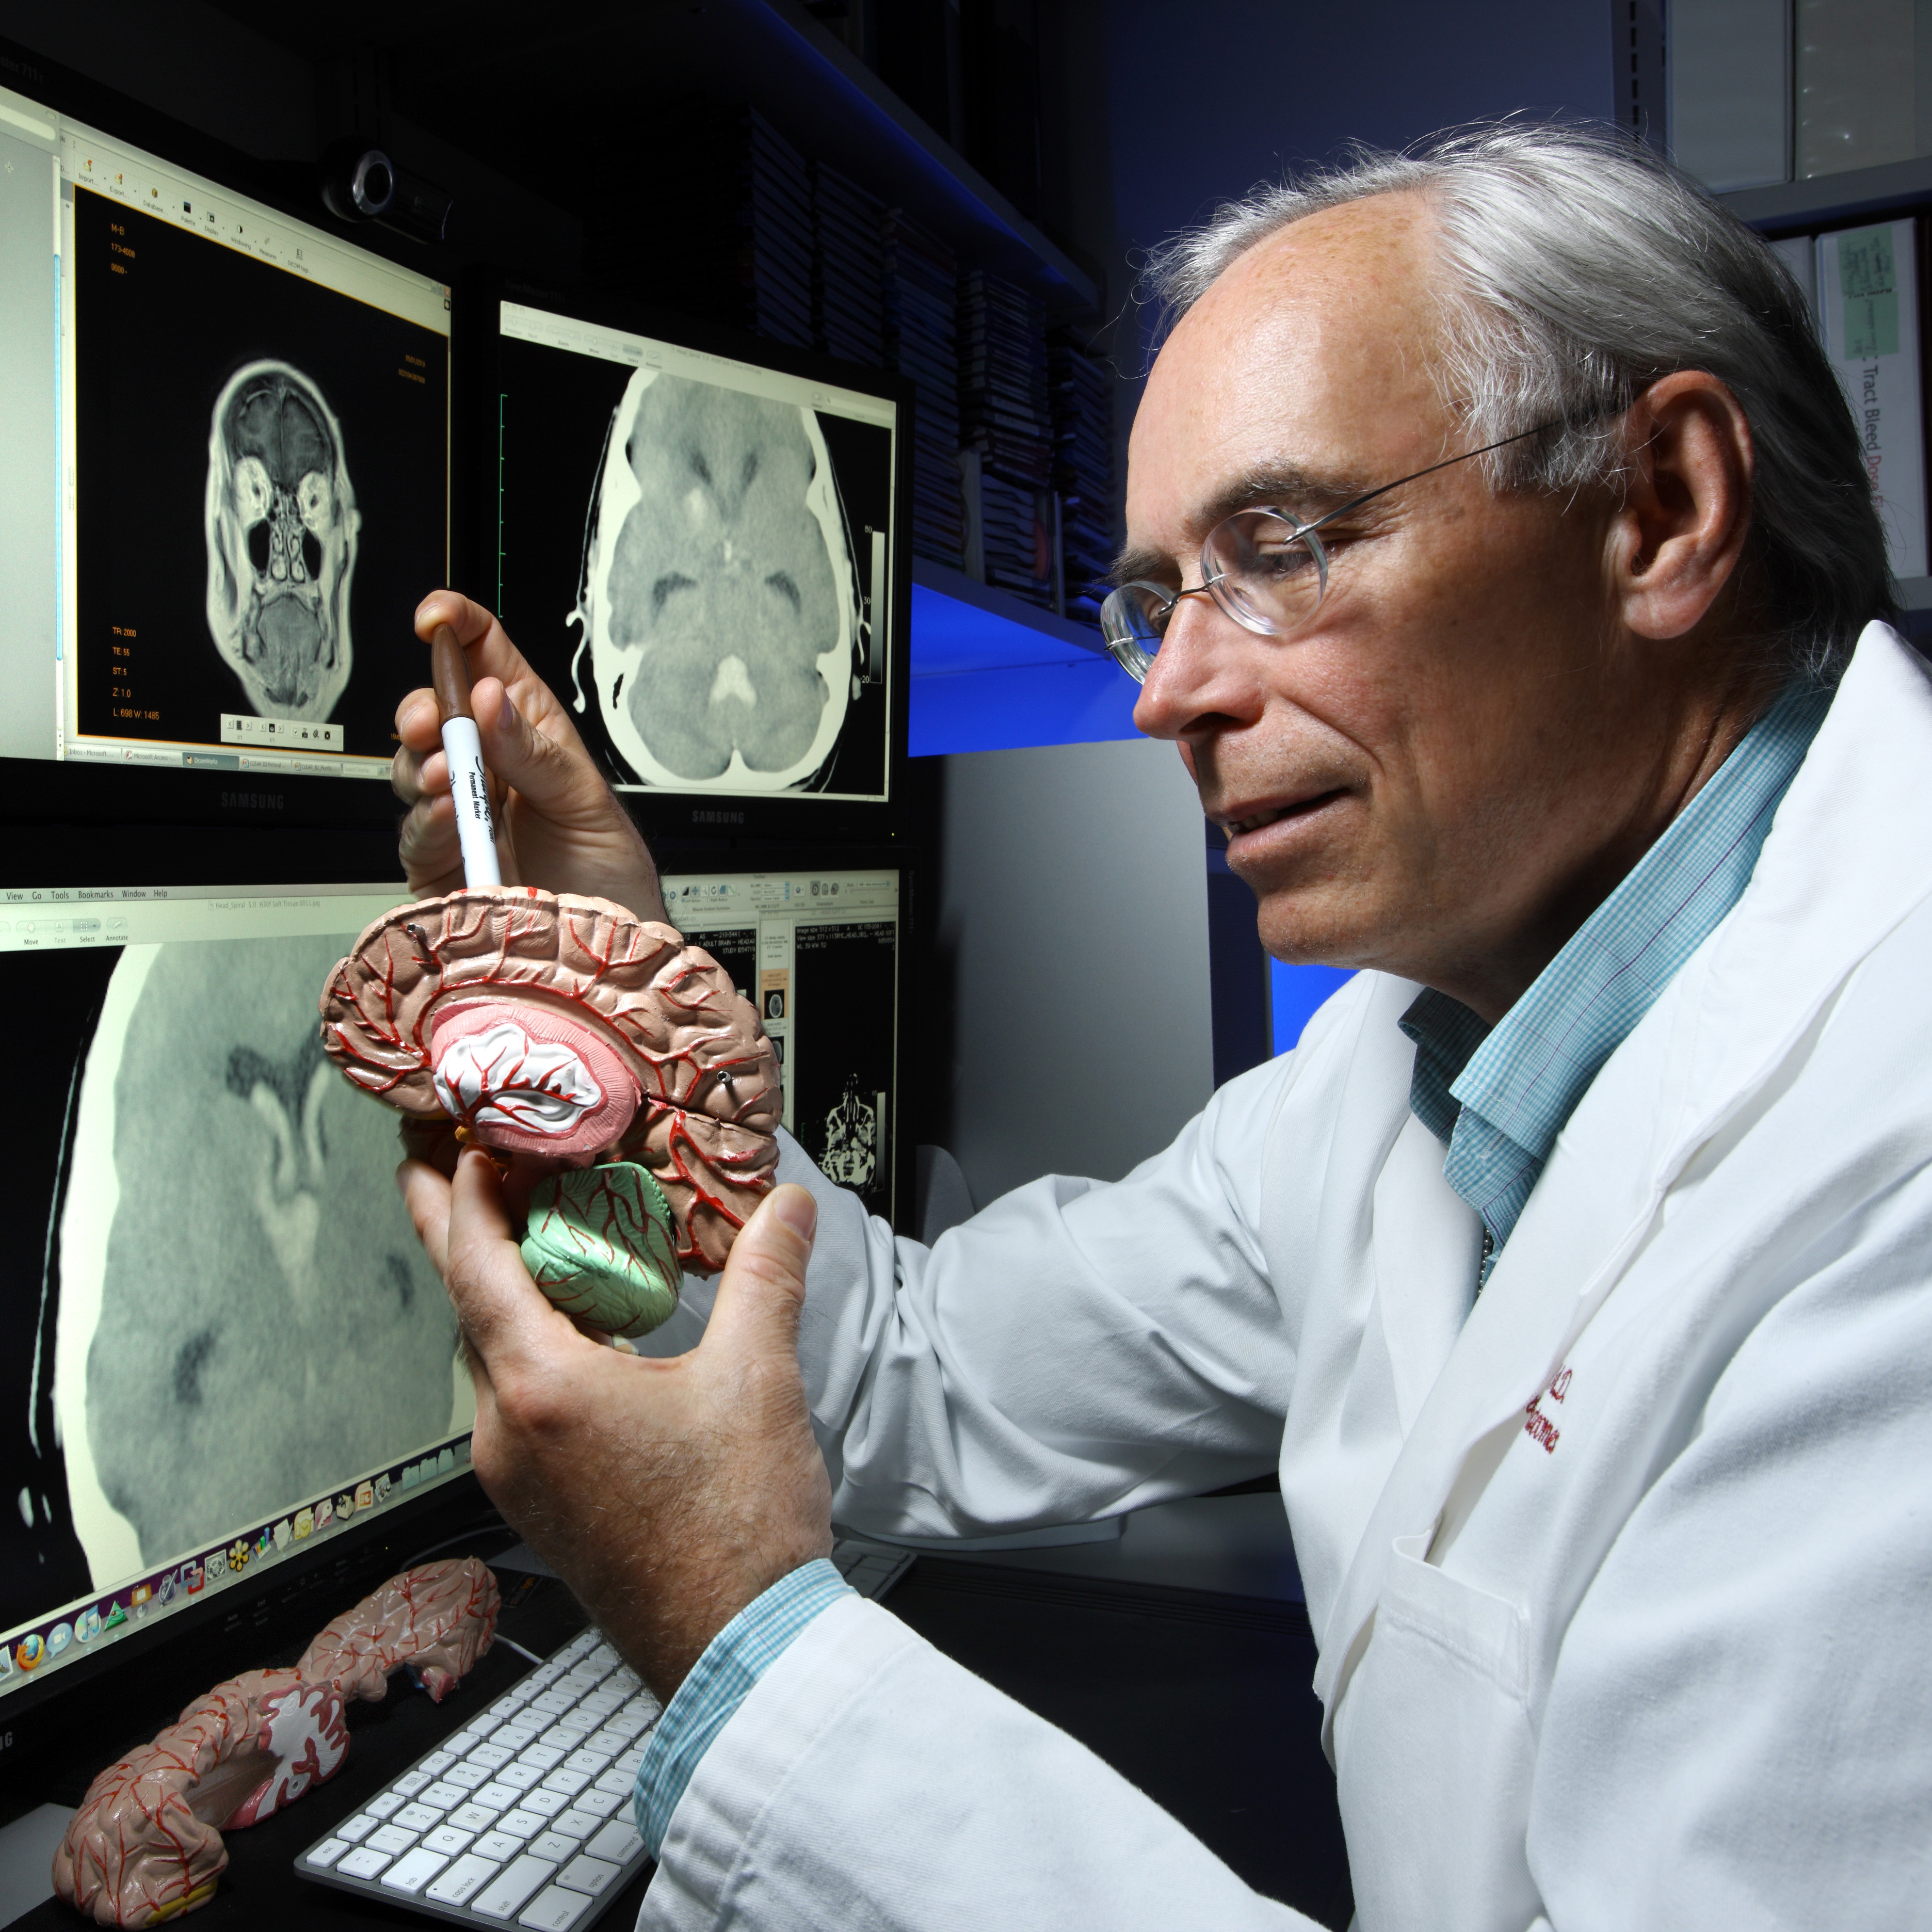 Dr. Daniel Hanley holds a plastic brain model while facing computer monitors displaying brain images.